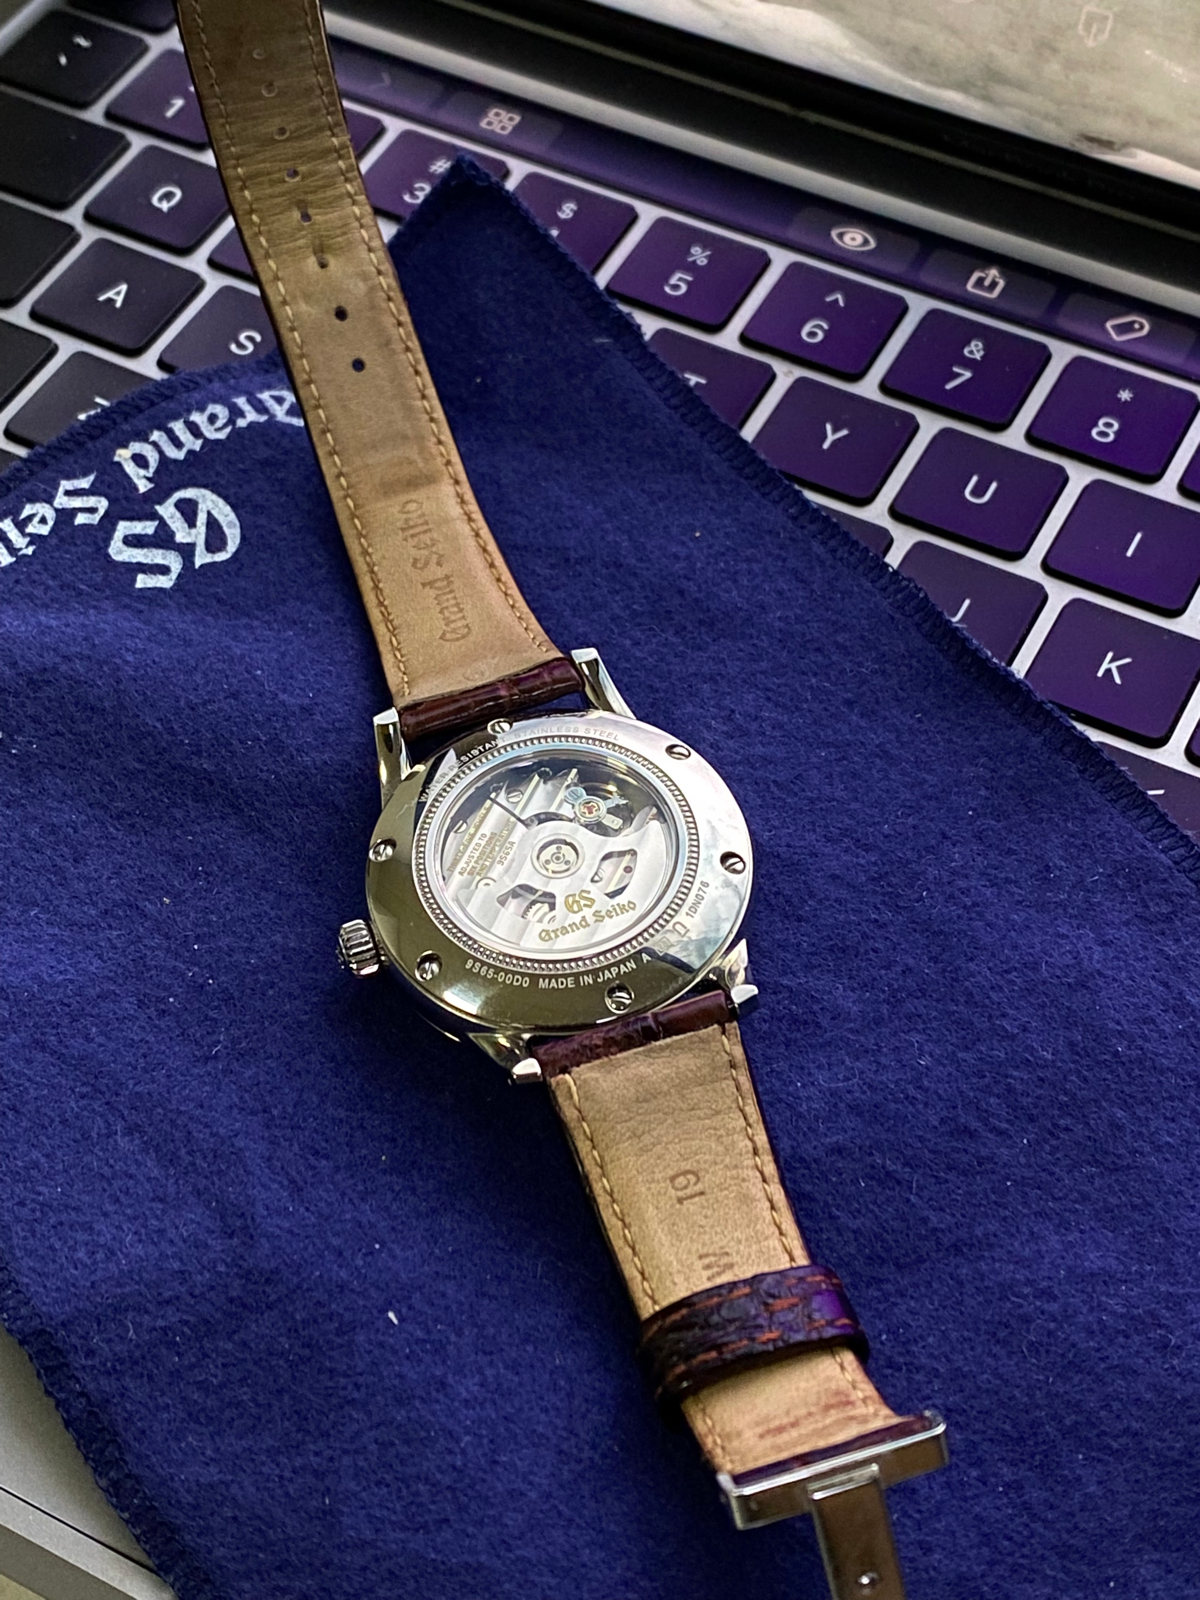 Owner review: Grand Seiko SBGR261 - FIFTH WRIST